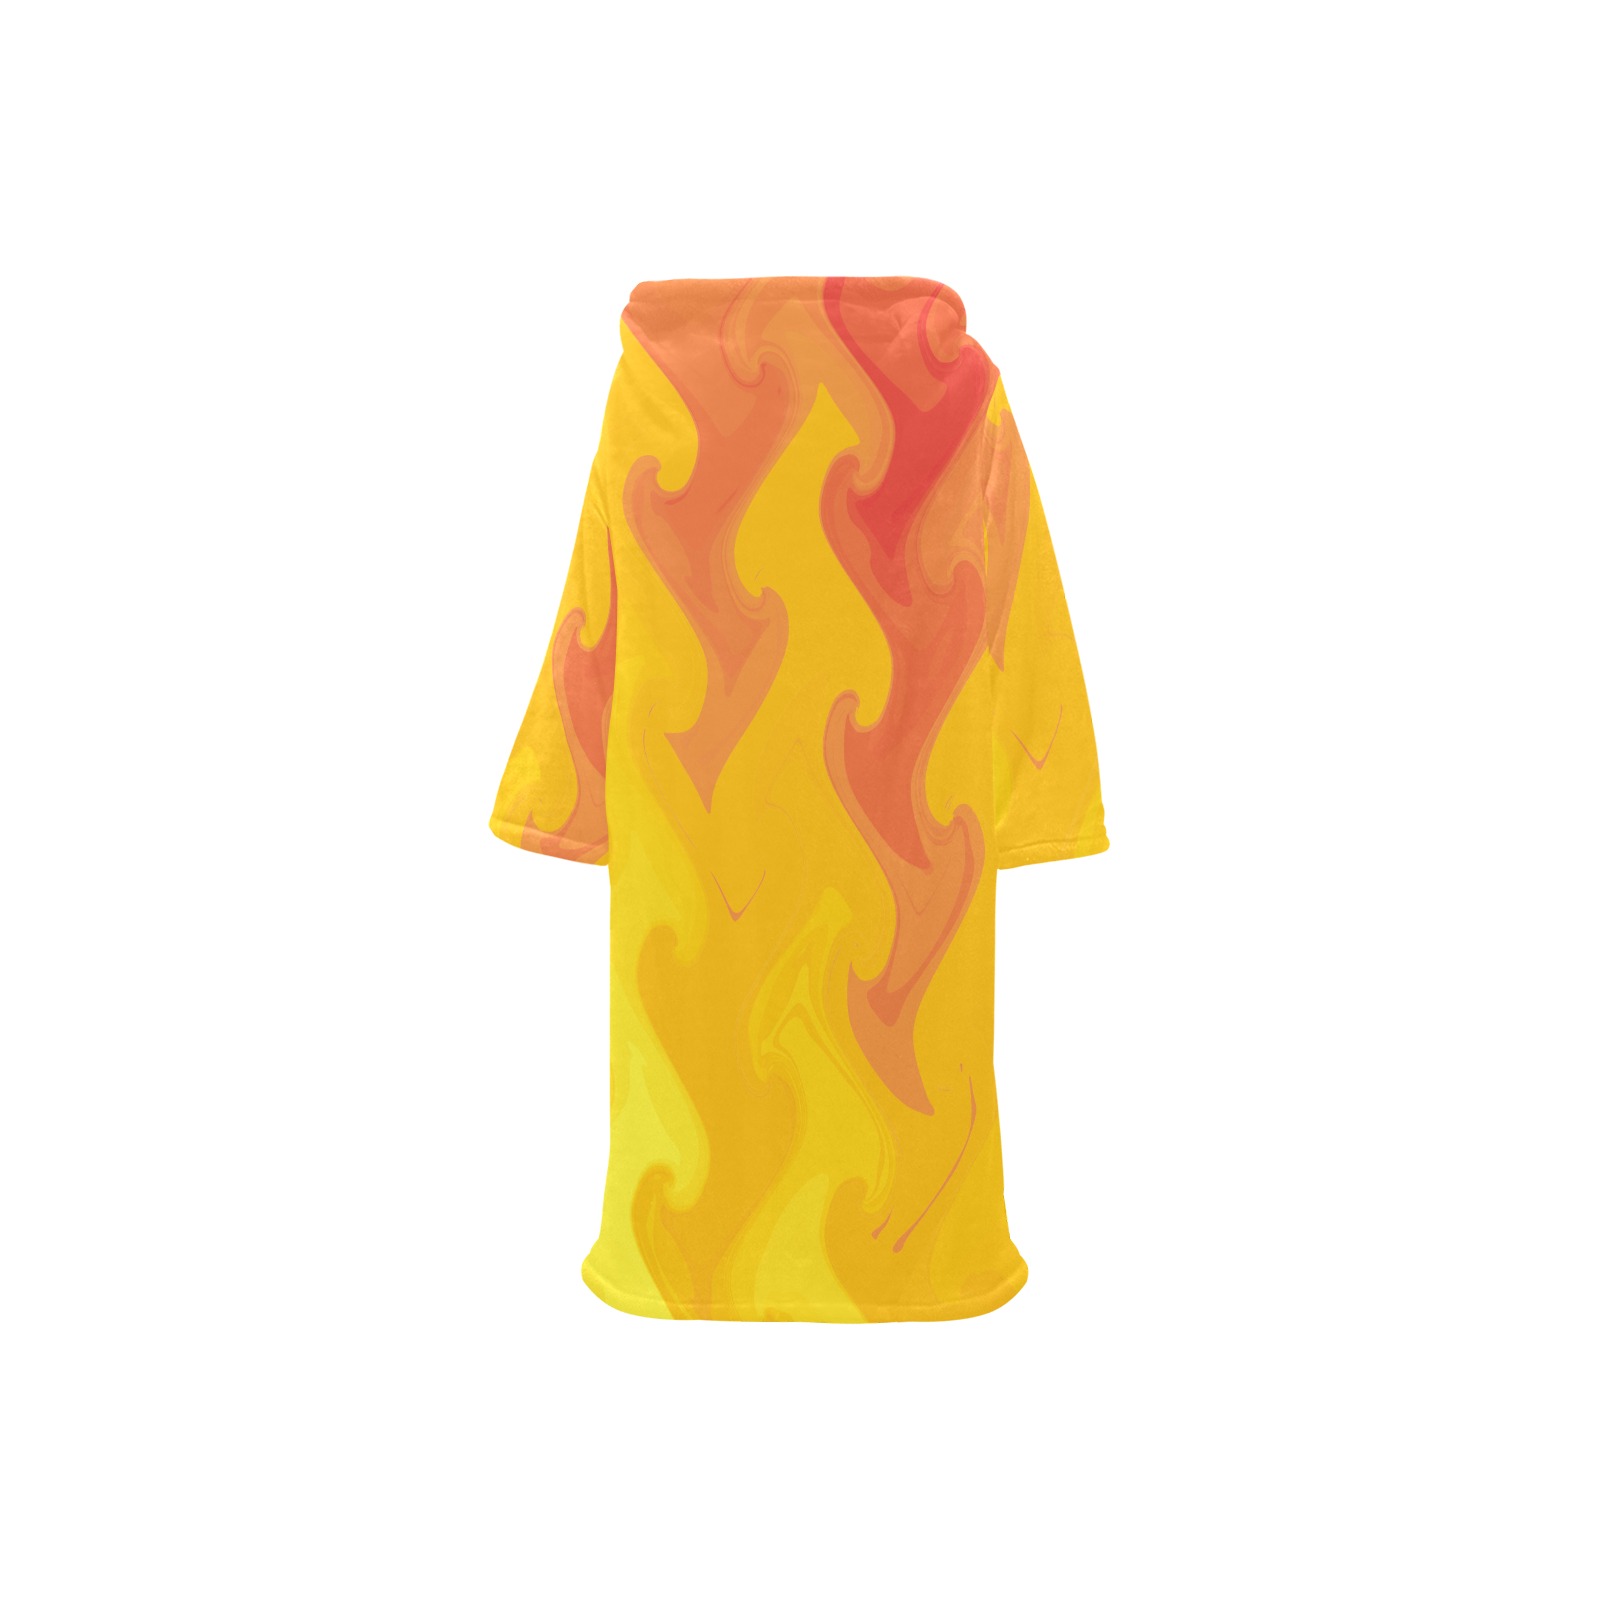 twin_flame Blanket Robe with Sleeves for Kids